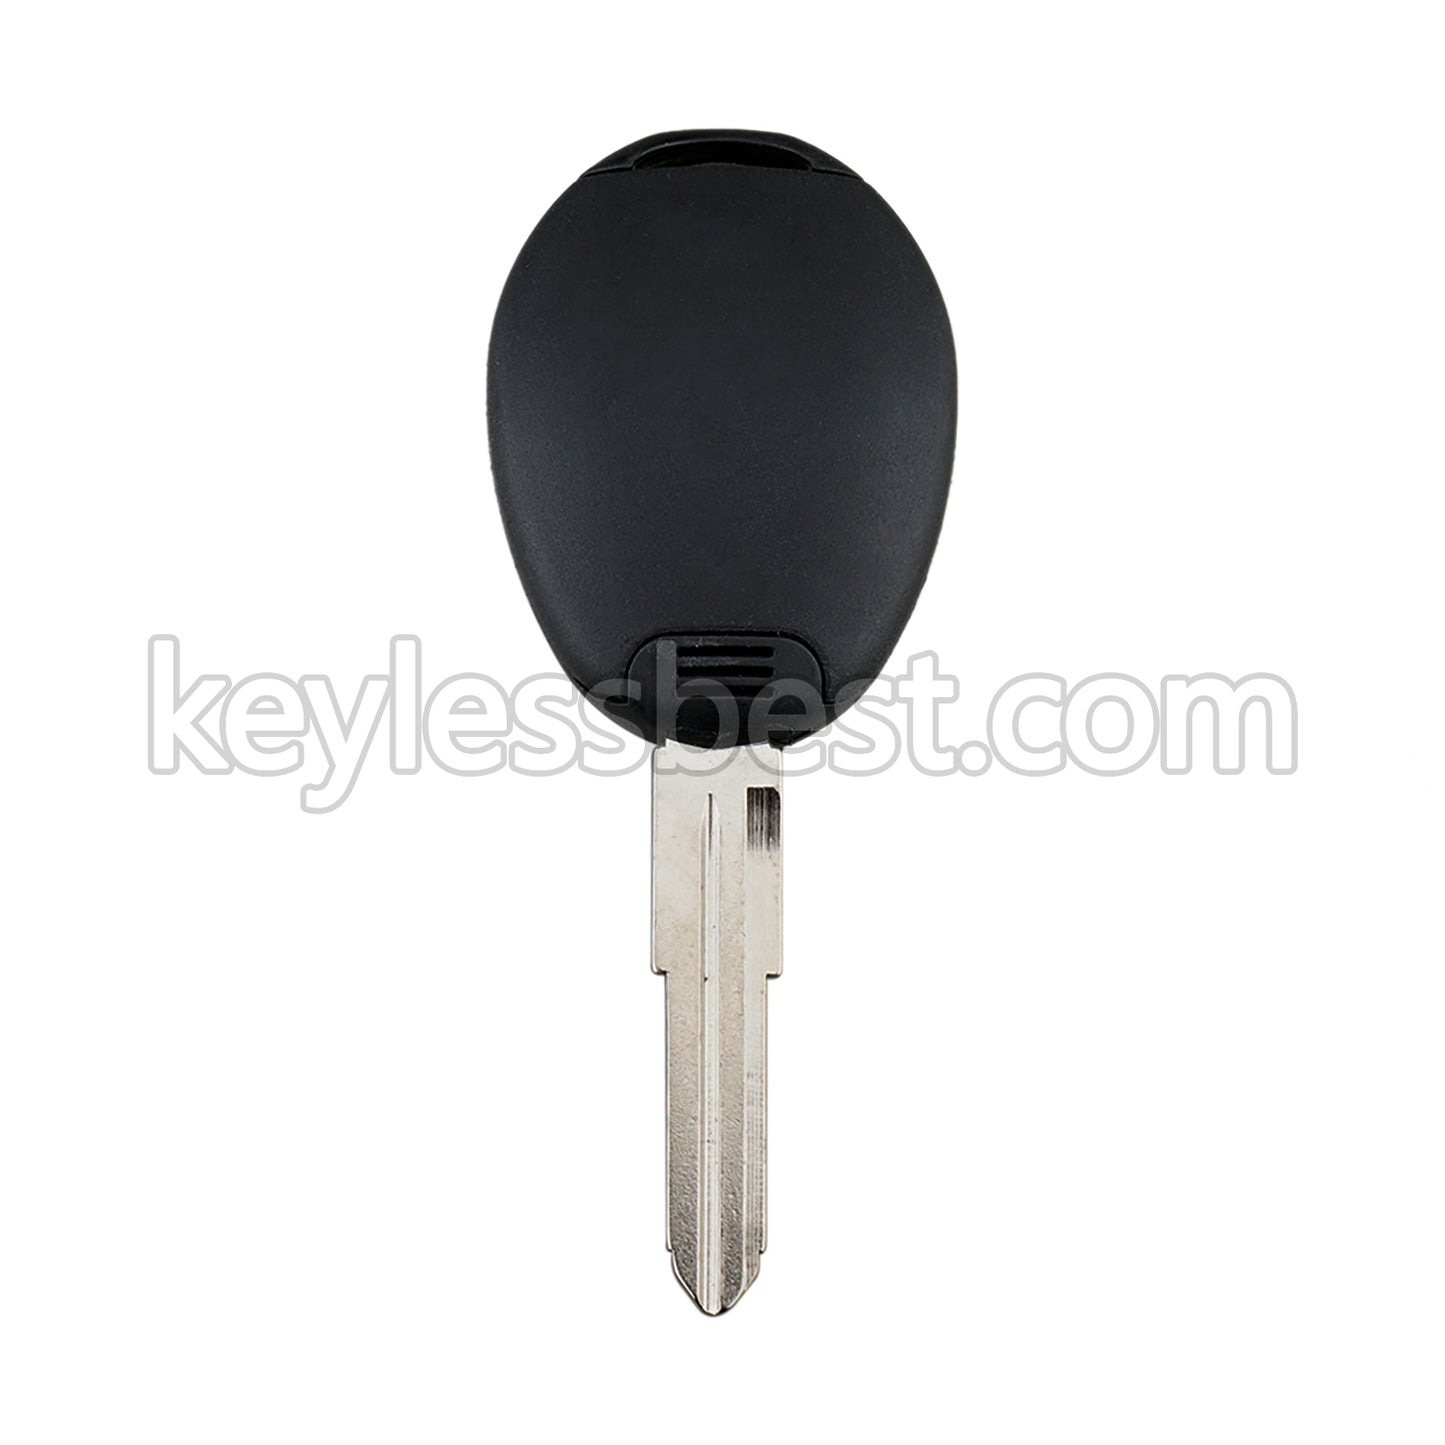 1999-2004 Rover Discovery / 2 Buttons Remote Key / N5FVALTX3 CWE100710KIT / 315MHz